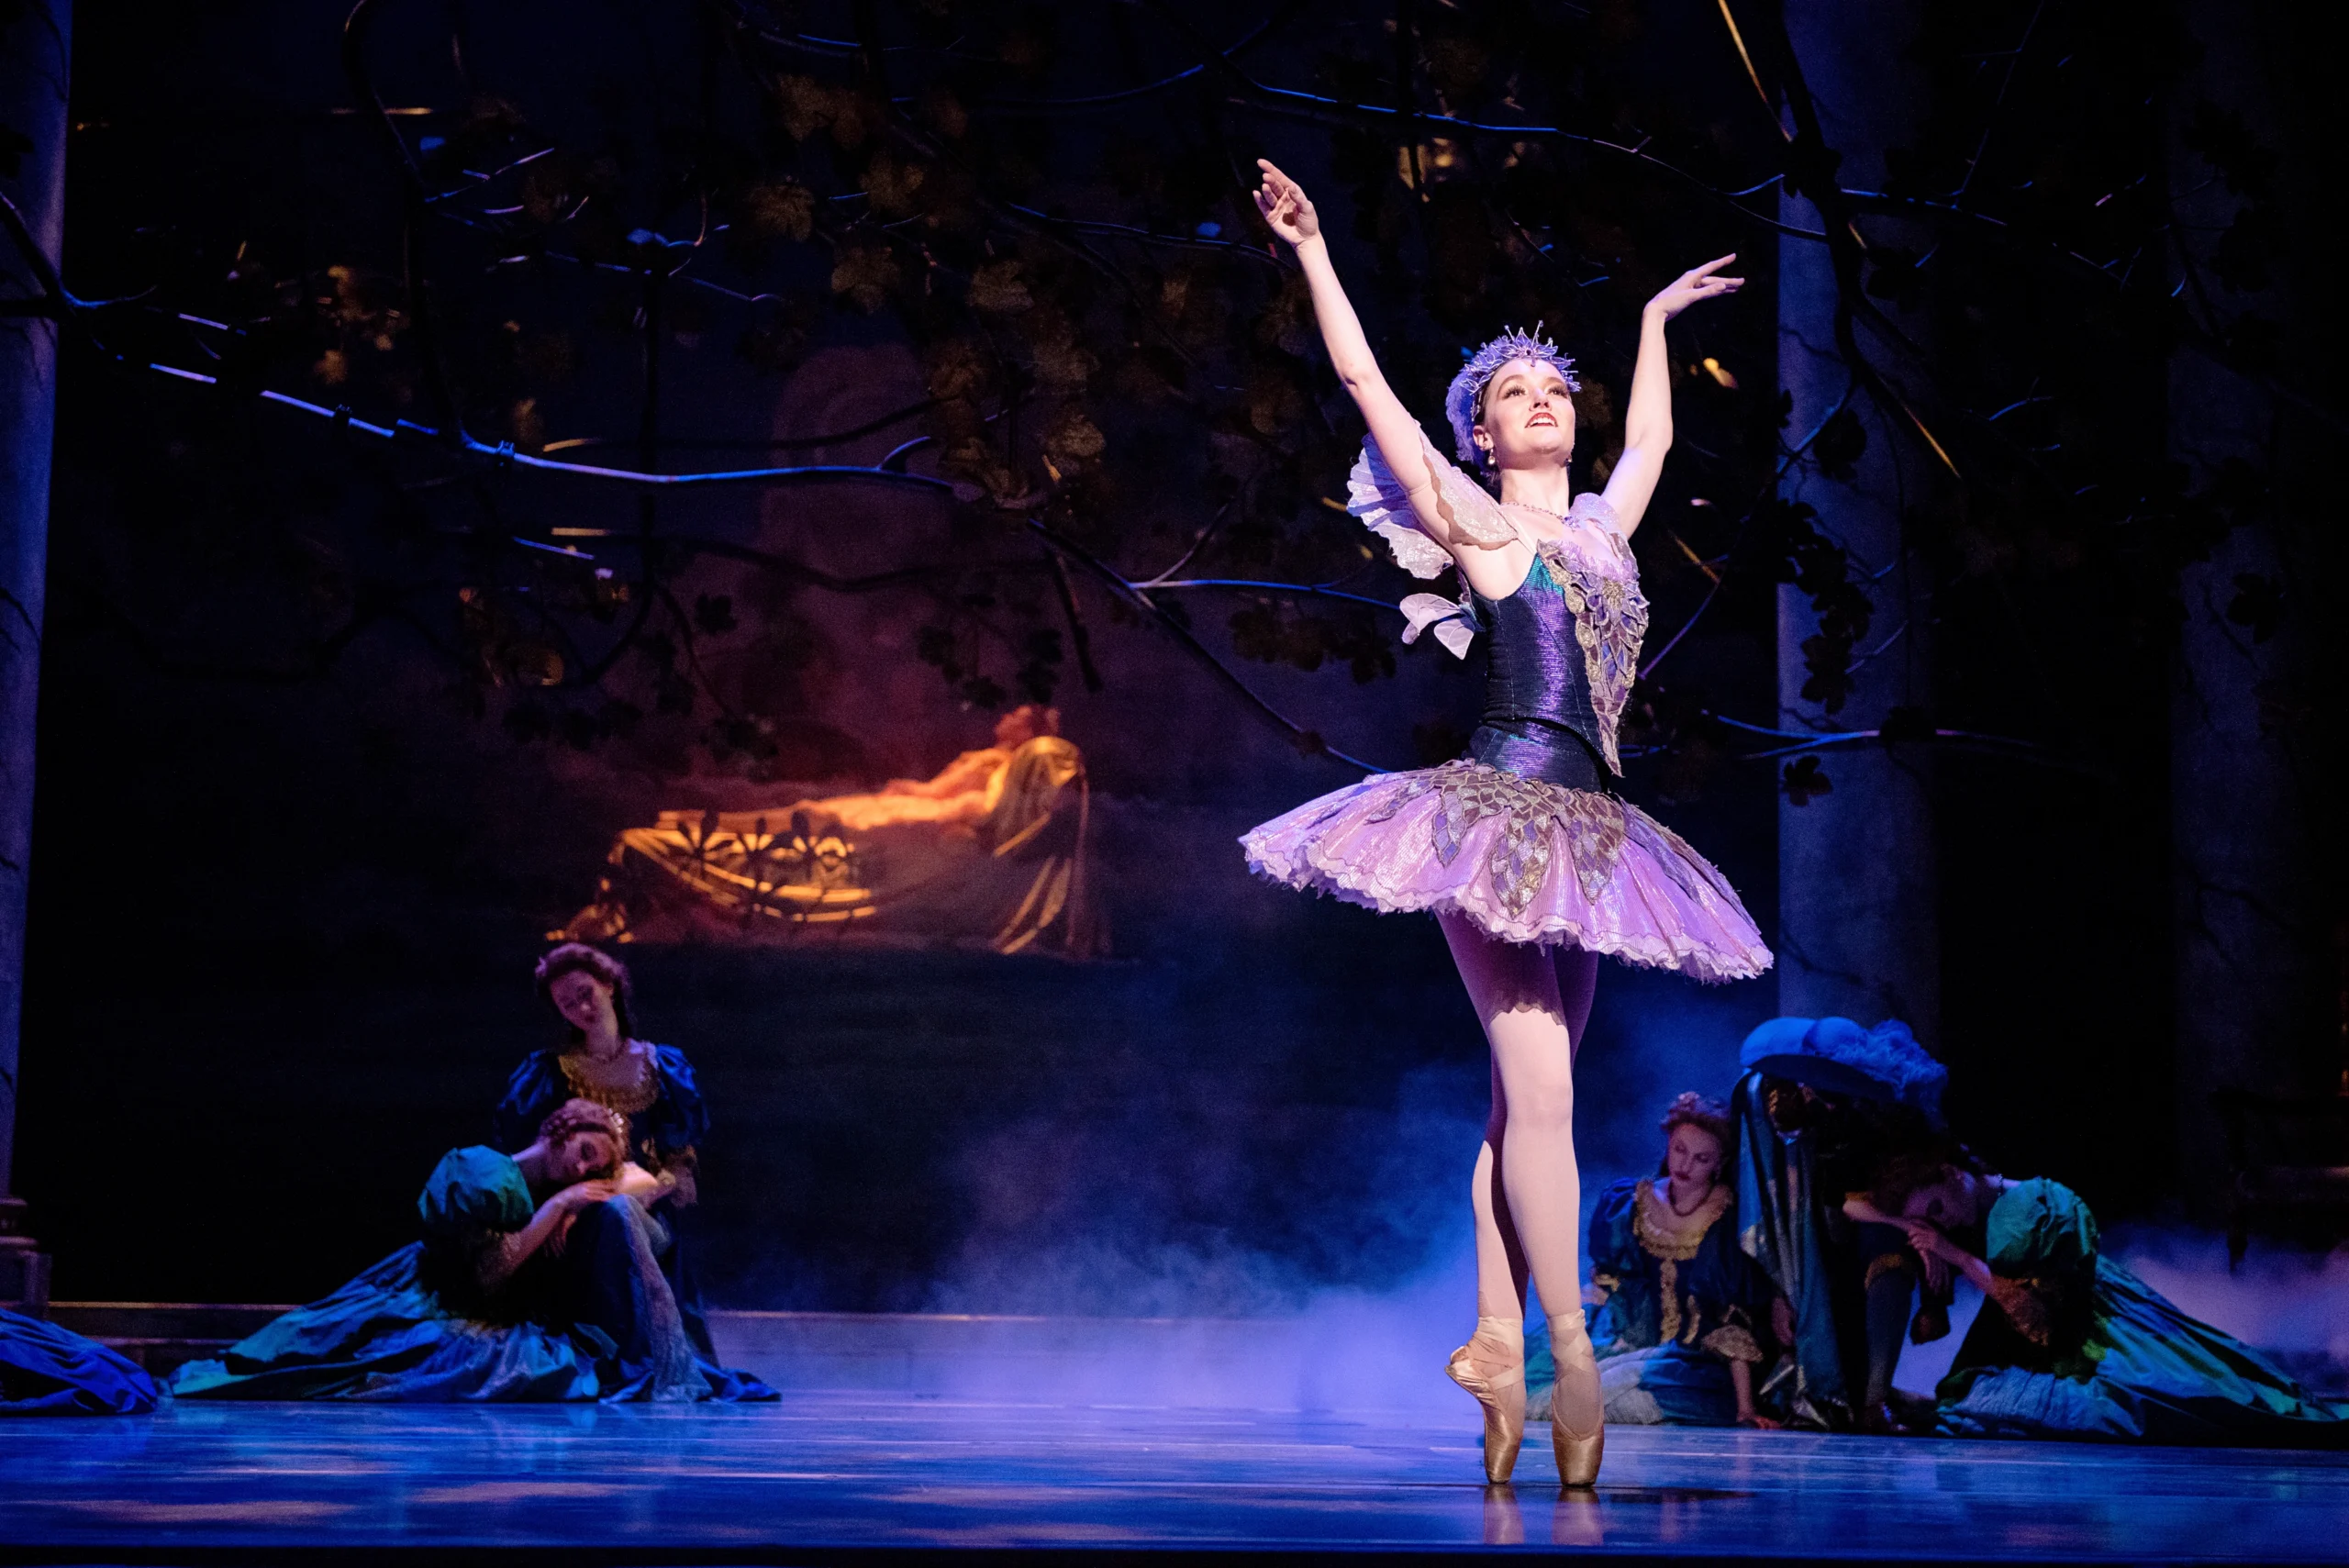 Sarah Lapointe performs onstage in a purple tutu and crown. She smiles and stands in sus-sous on pointe with her right foot front and her arms lifted up into a V shape. Behind her the stage is dark and lit in purple, with a warm spotlight on a dancer as Sleeping Beauty lying down on a bed in the background. Two clusters of dancers sit on the floor as if asleep.